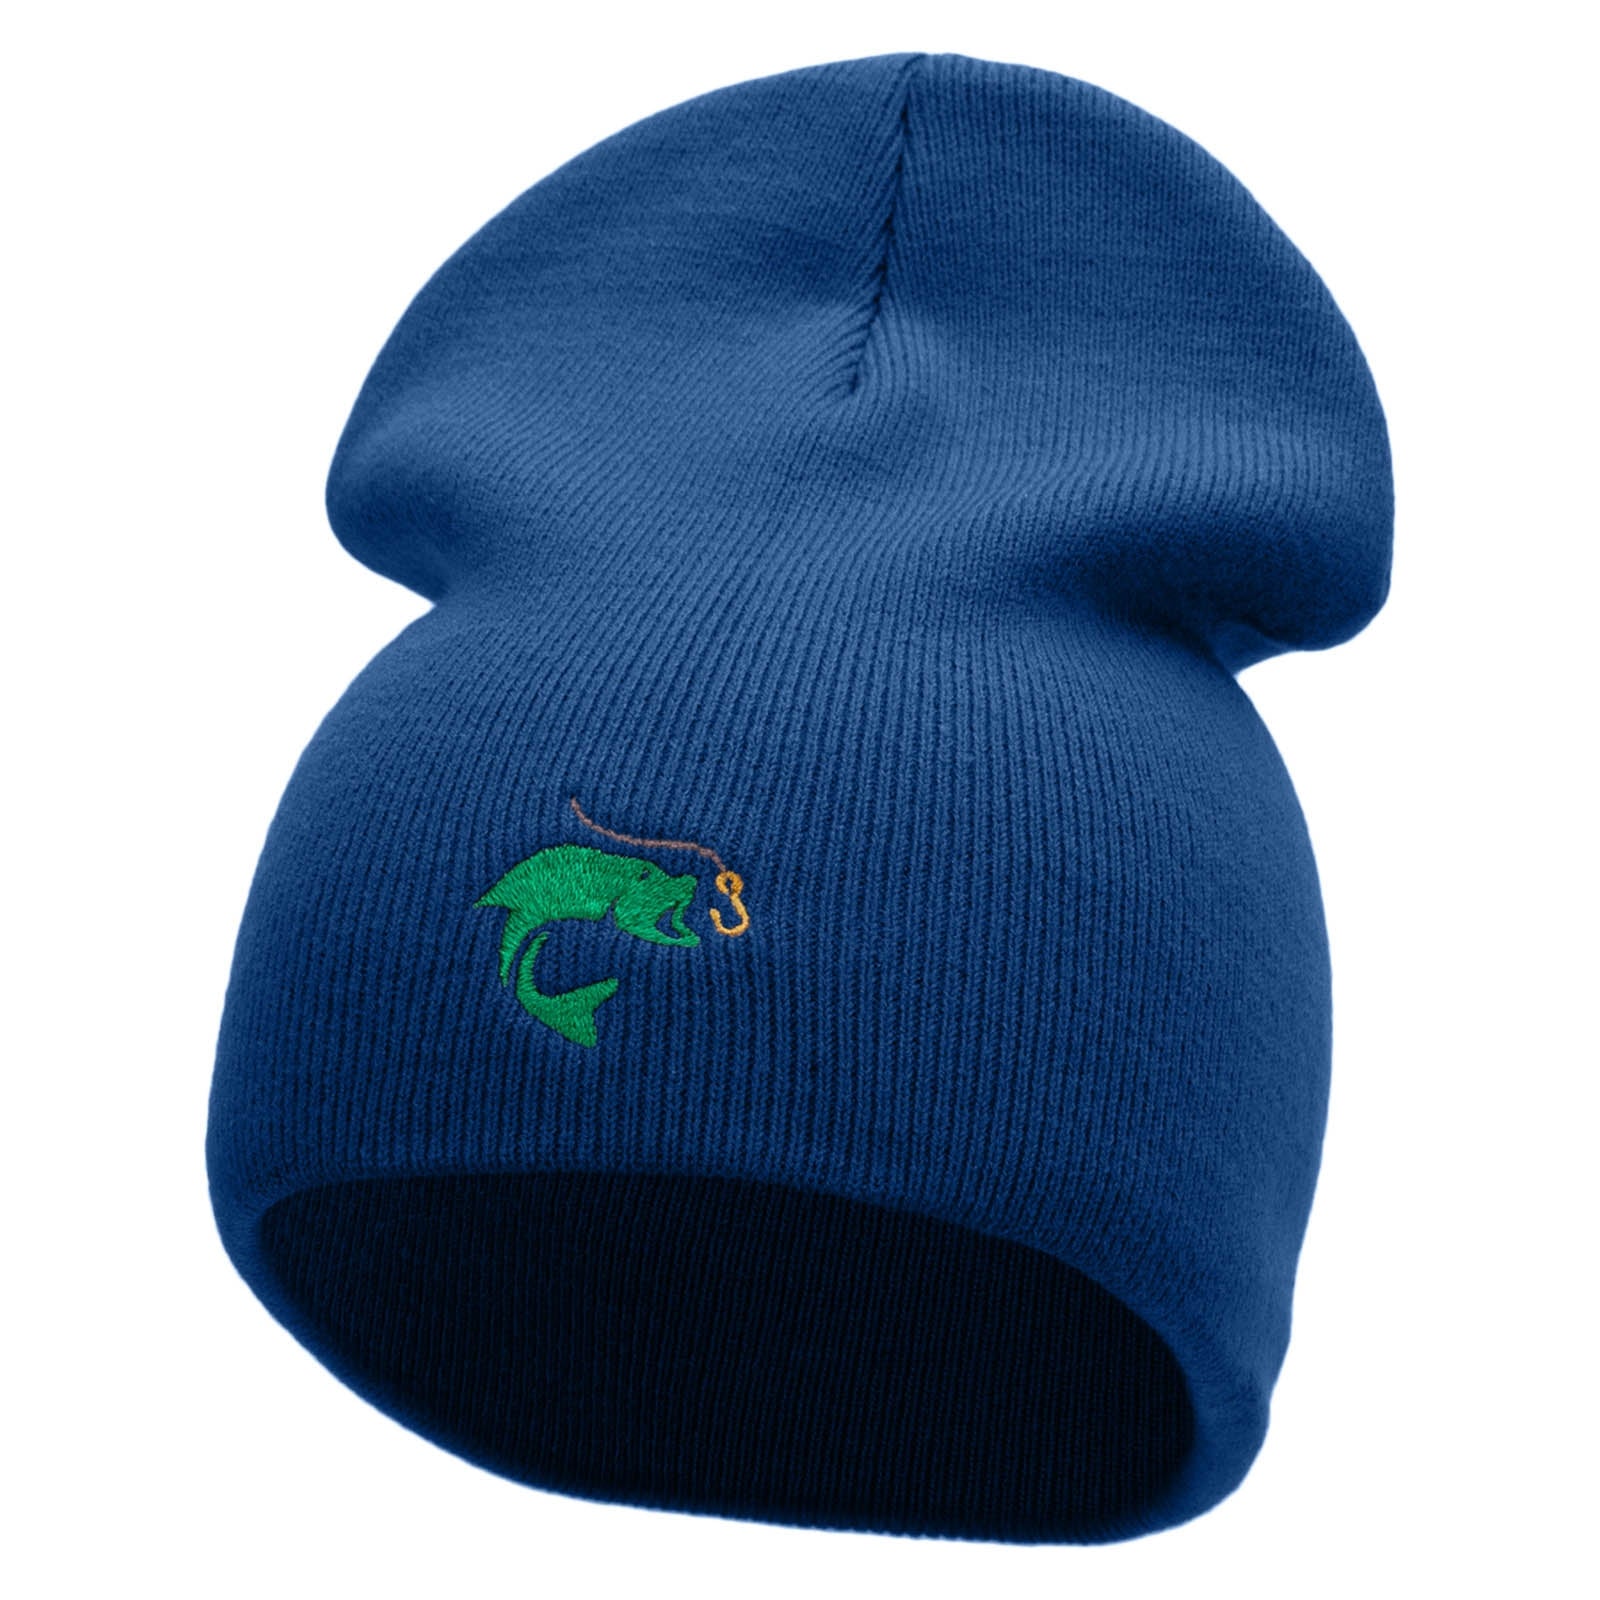 Hook Line Fish Embroidered 8 Inch Short Beanie Made in USA - Royal Blue OSFM